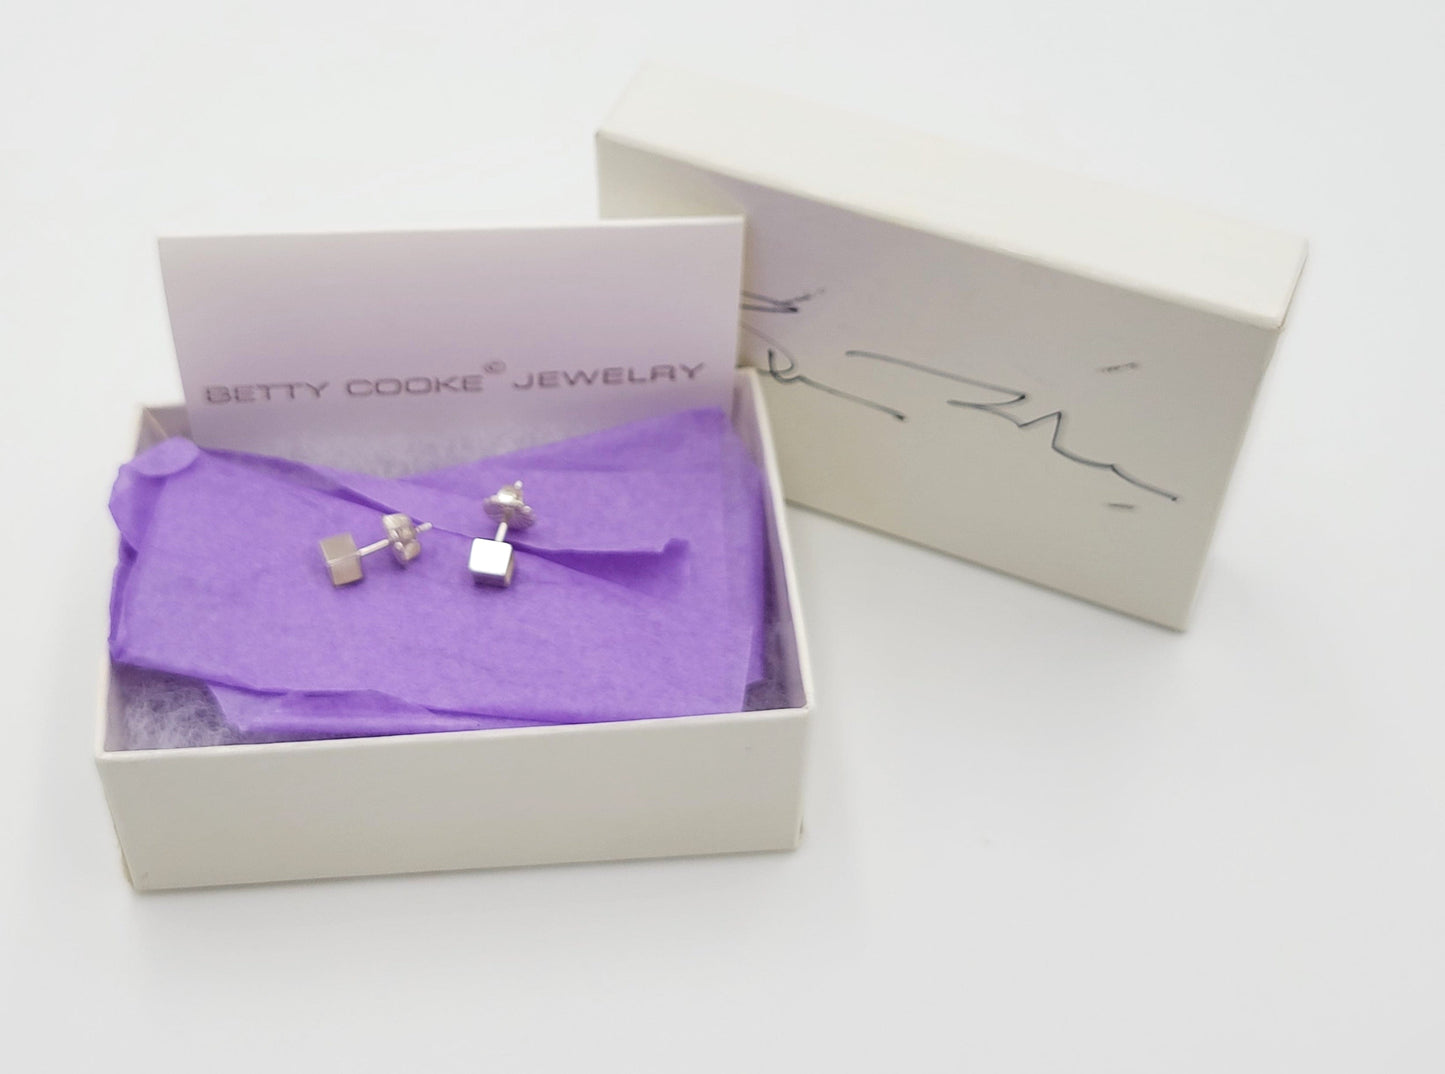 Betty Cooke Jewelry Sterling Iconic Betty Cooke Modernist Earrings Circa 1960s - In Transit